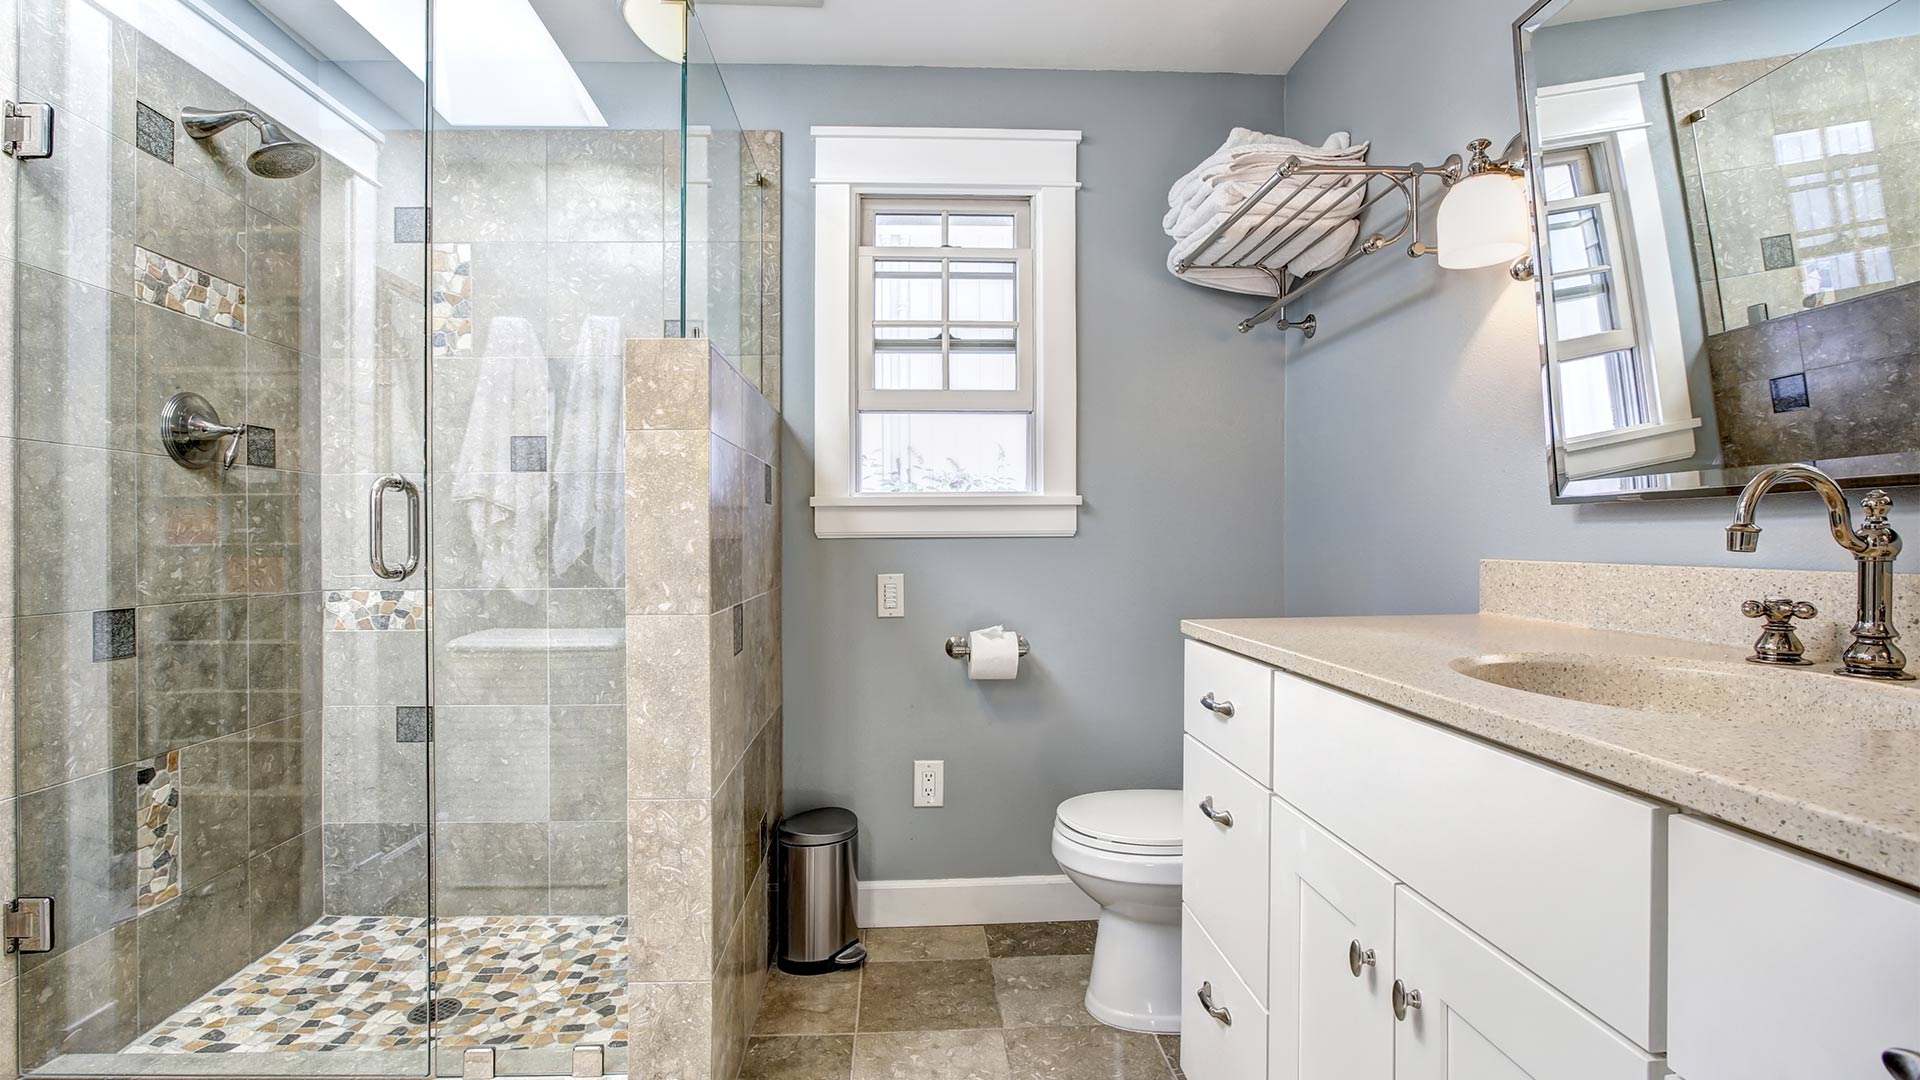 master bathroom interiors with shower tiles and flooring installed everett wa